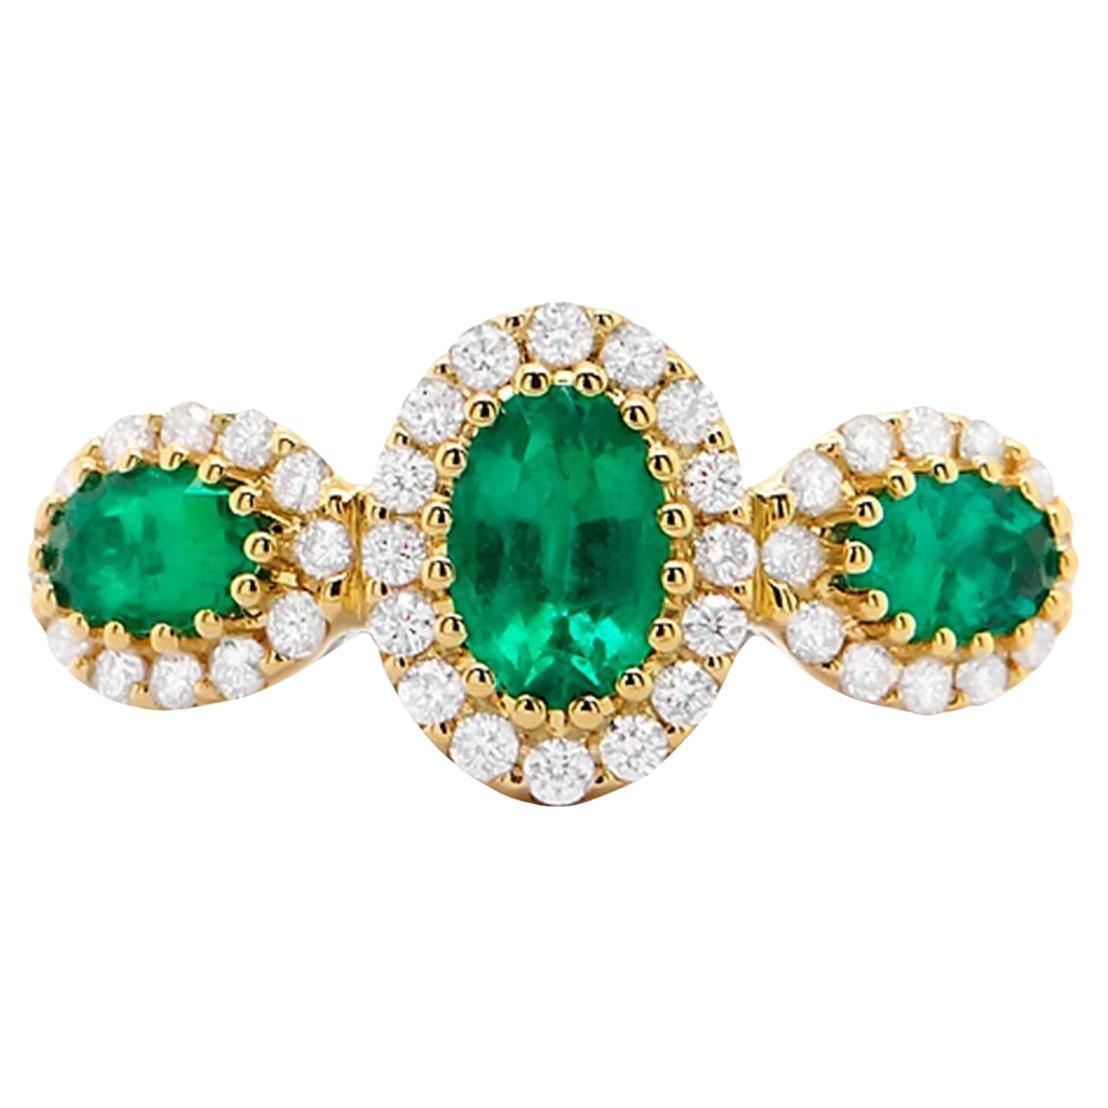 Emerald Ring With Diamonds 1.15 Carats 18K Gold For Sale